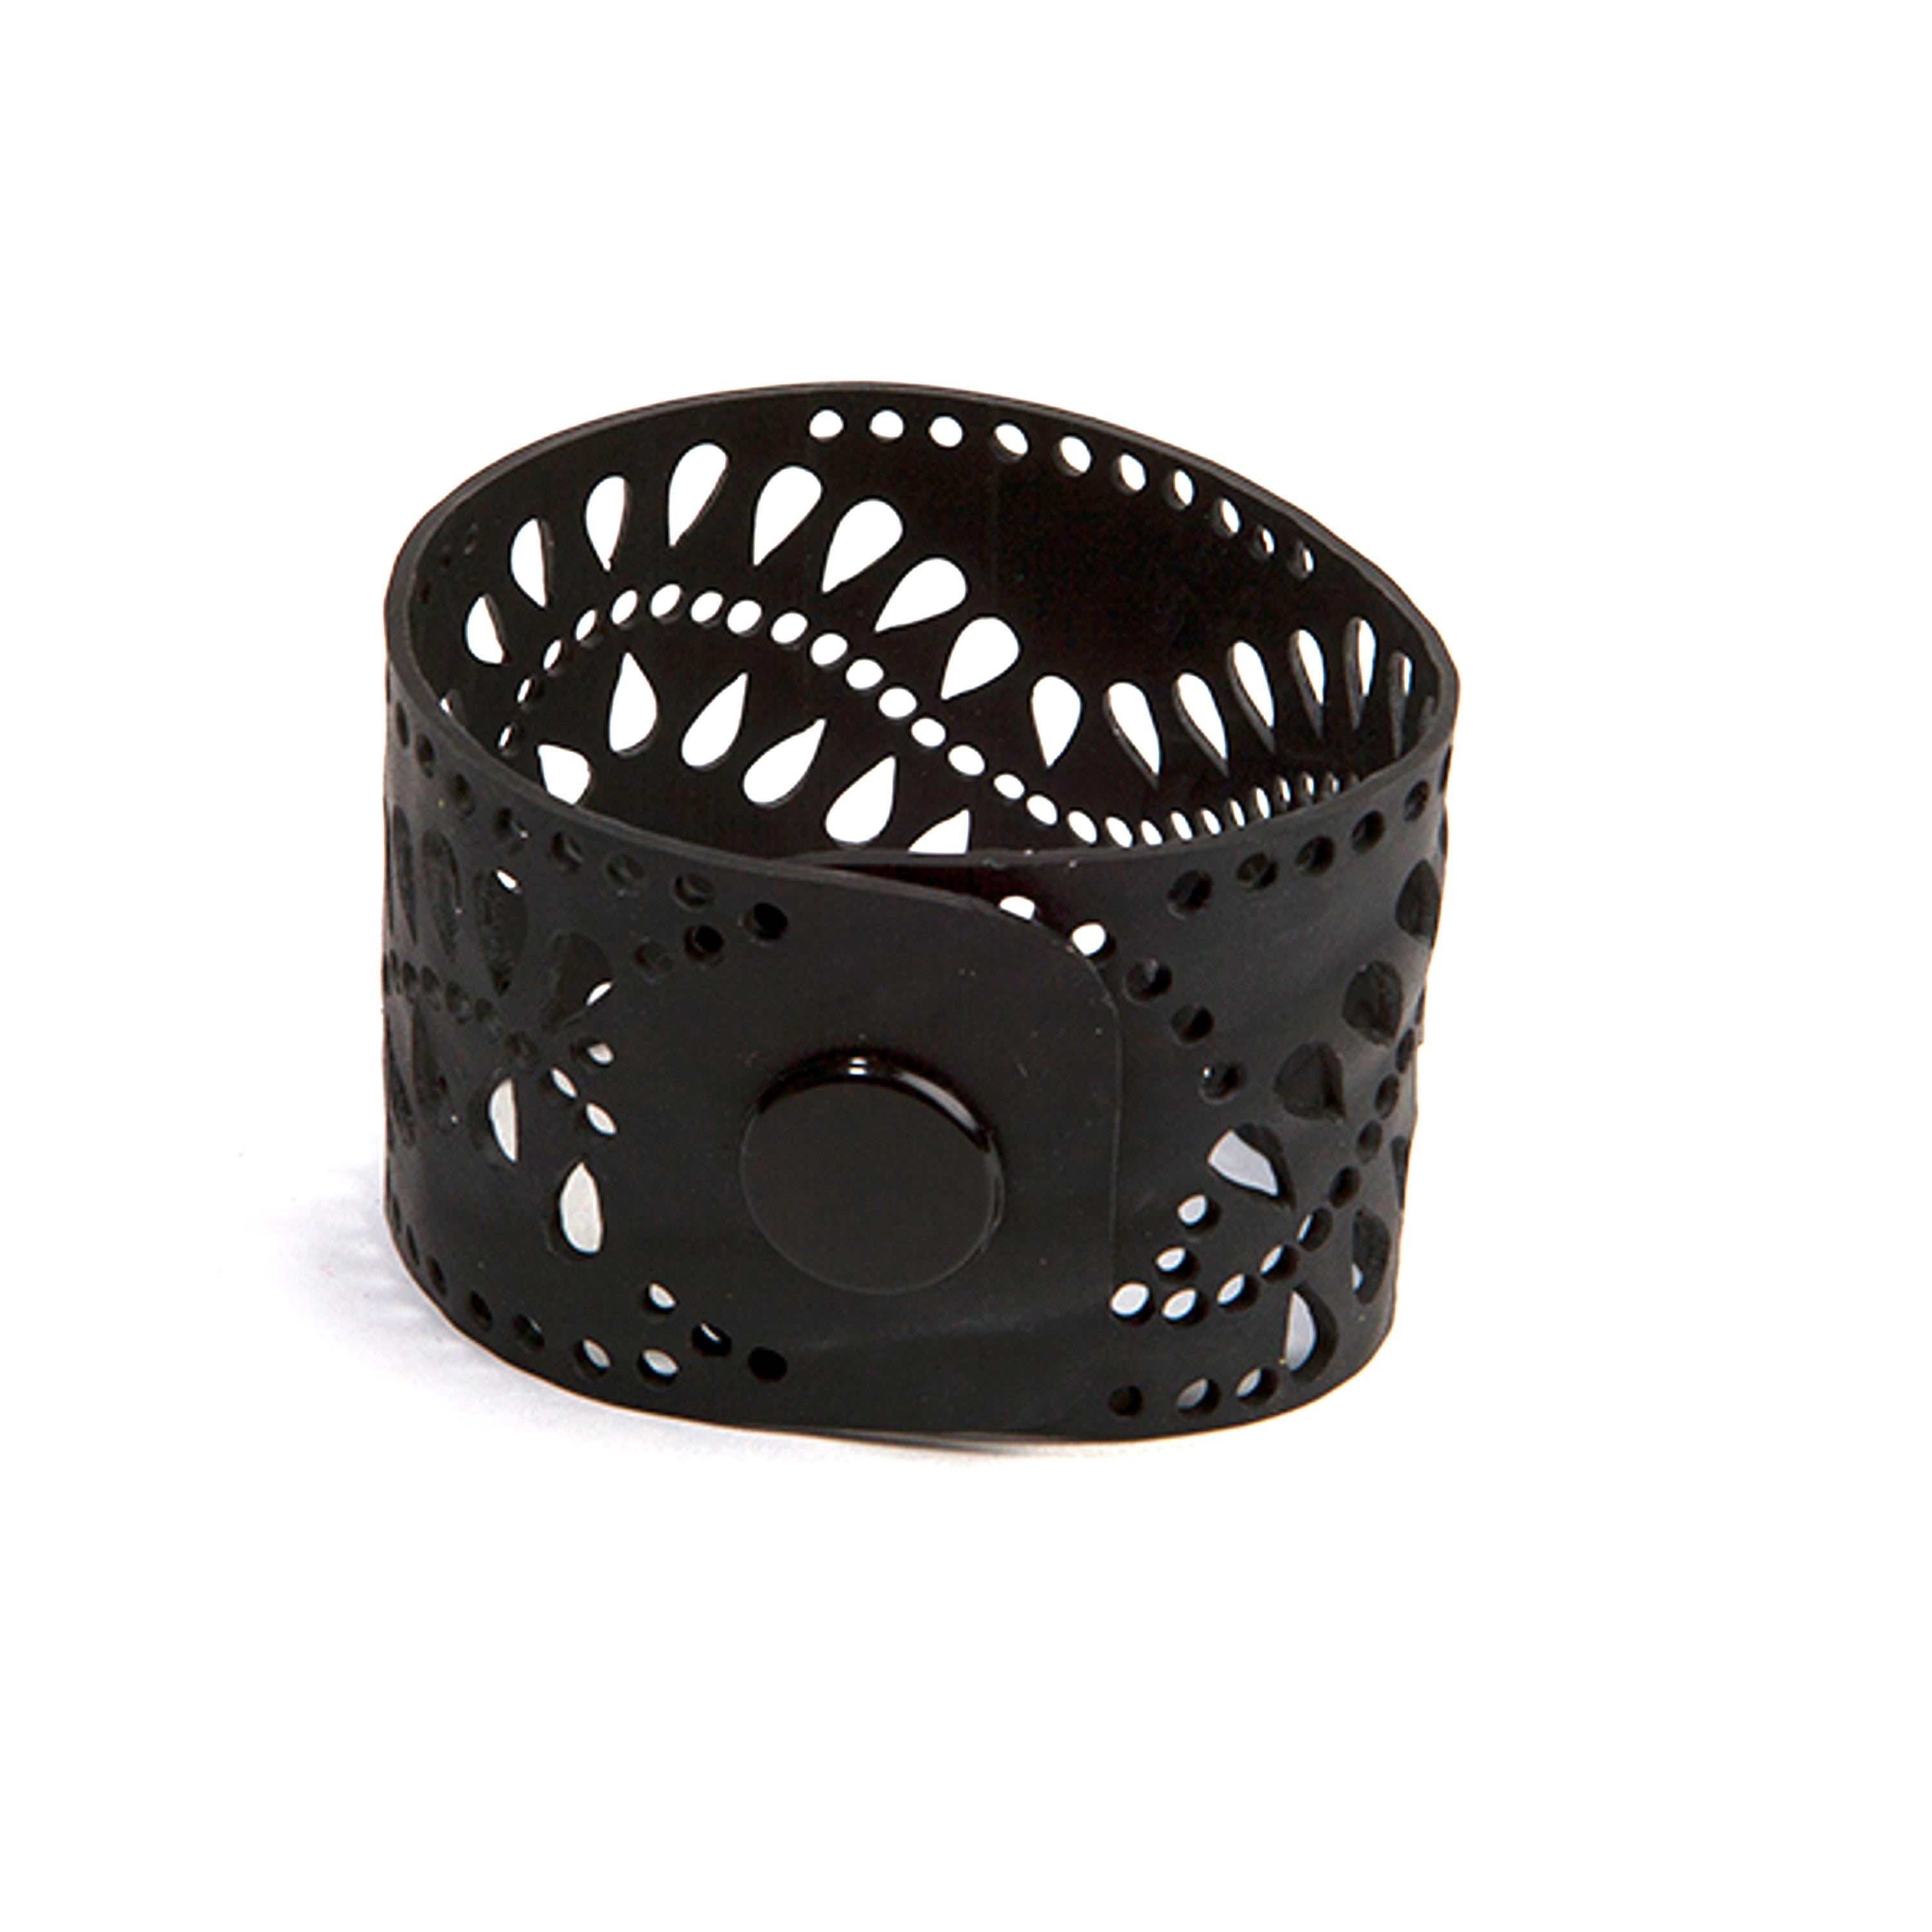 Kiky Unique Recycled Rubber Bracelet by Paguro Upcycle